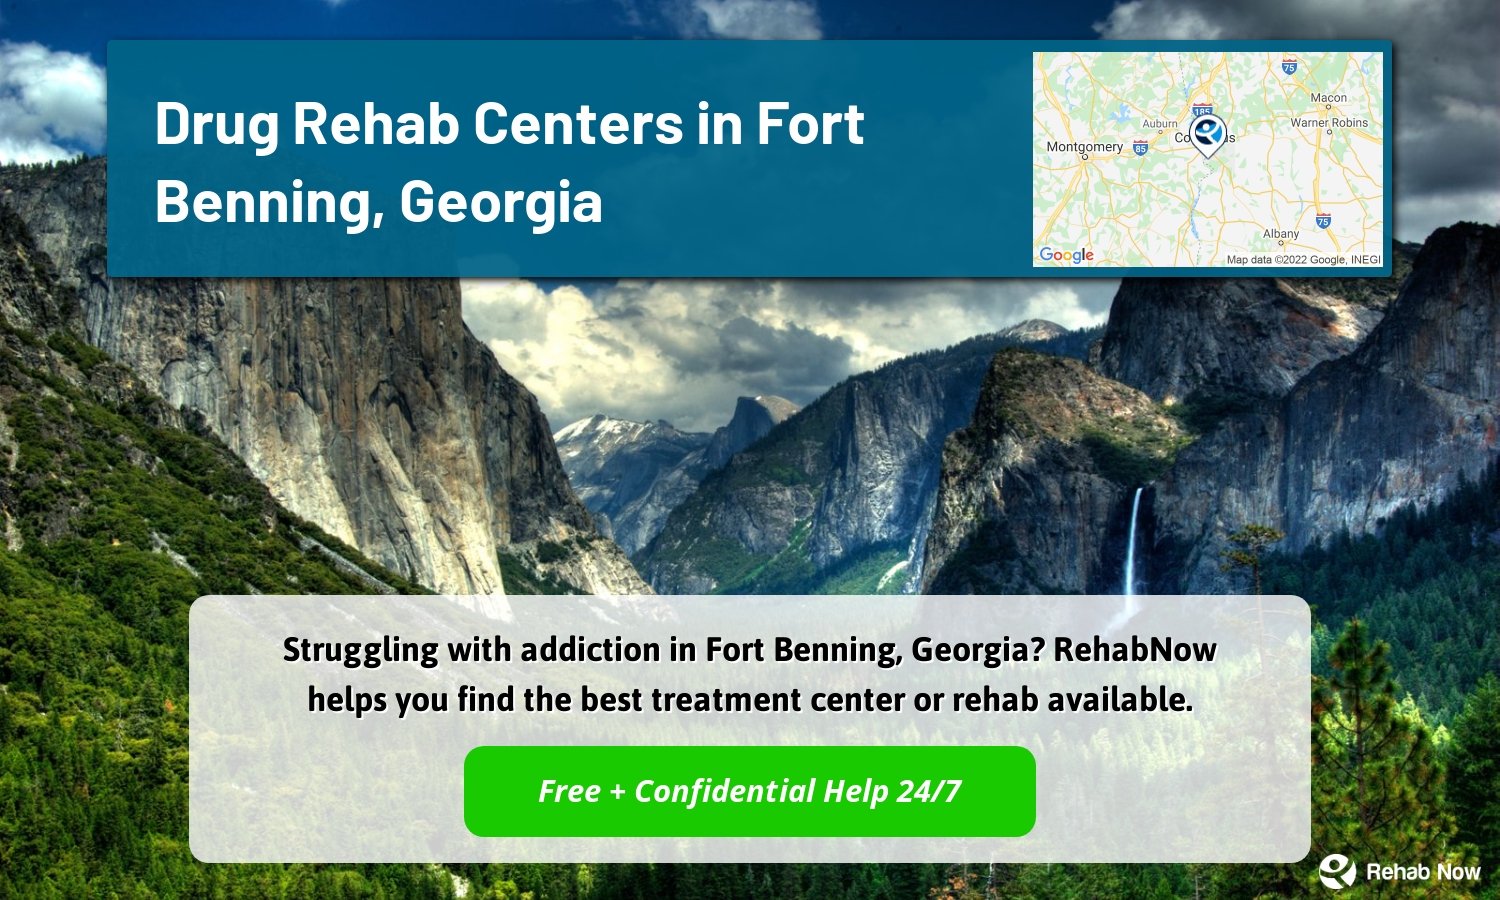 Struggling with addiction in Fort Benning, Georgia? RehabNow helps you find the best treatment center or rehab available.